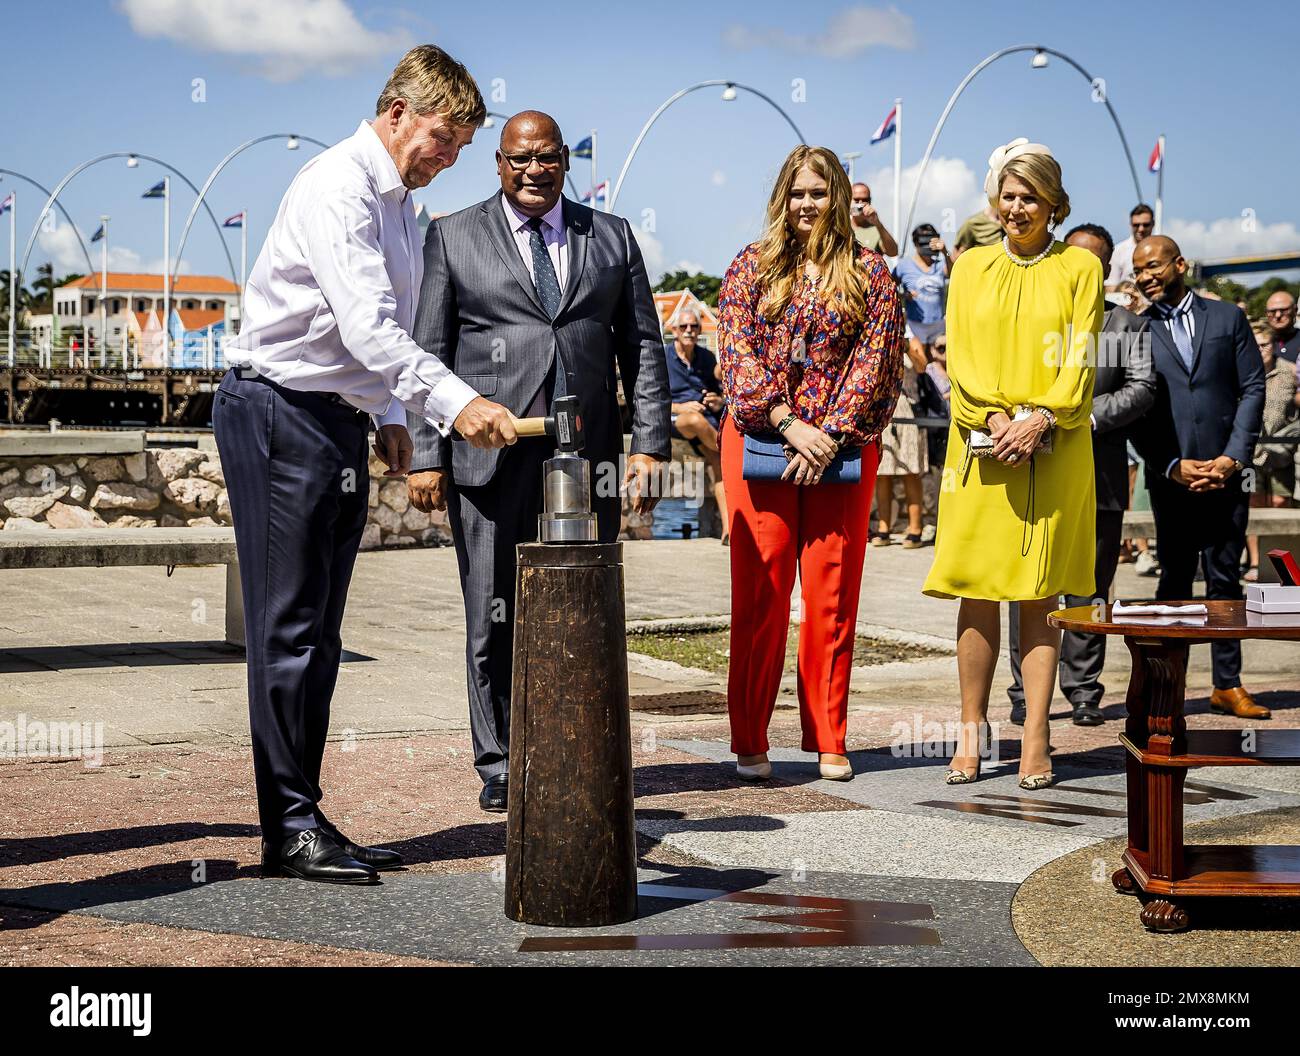 WILLEMSTAD - King Willem-Alexander strikes a euro coin on Curacao in the  presence of Queen Maxima and Princess Amalia. The Crown Princess has a  two-week introduction to the countries of Aruba, Curacao